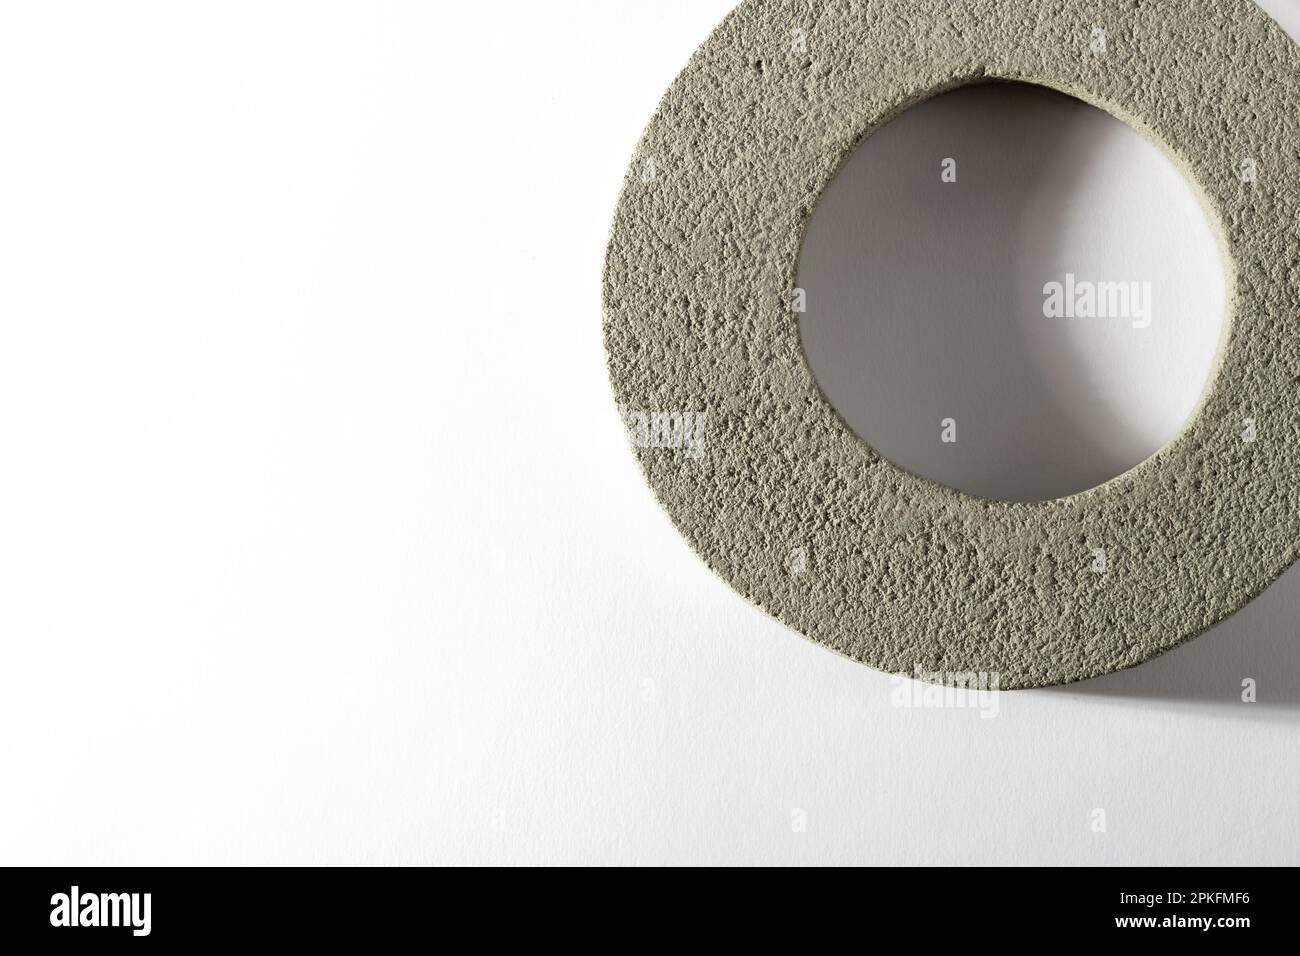 Top view of round shaped cement ring with hole in middle placed on white background Stock Photo